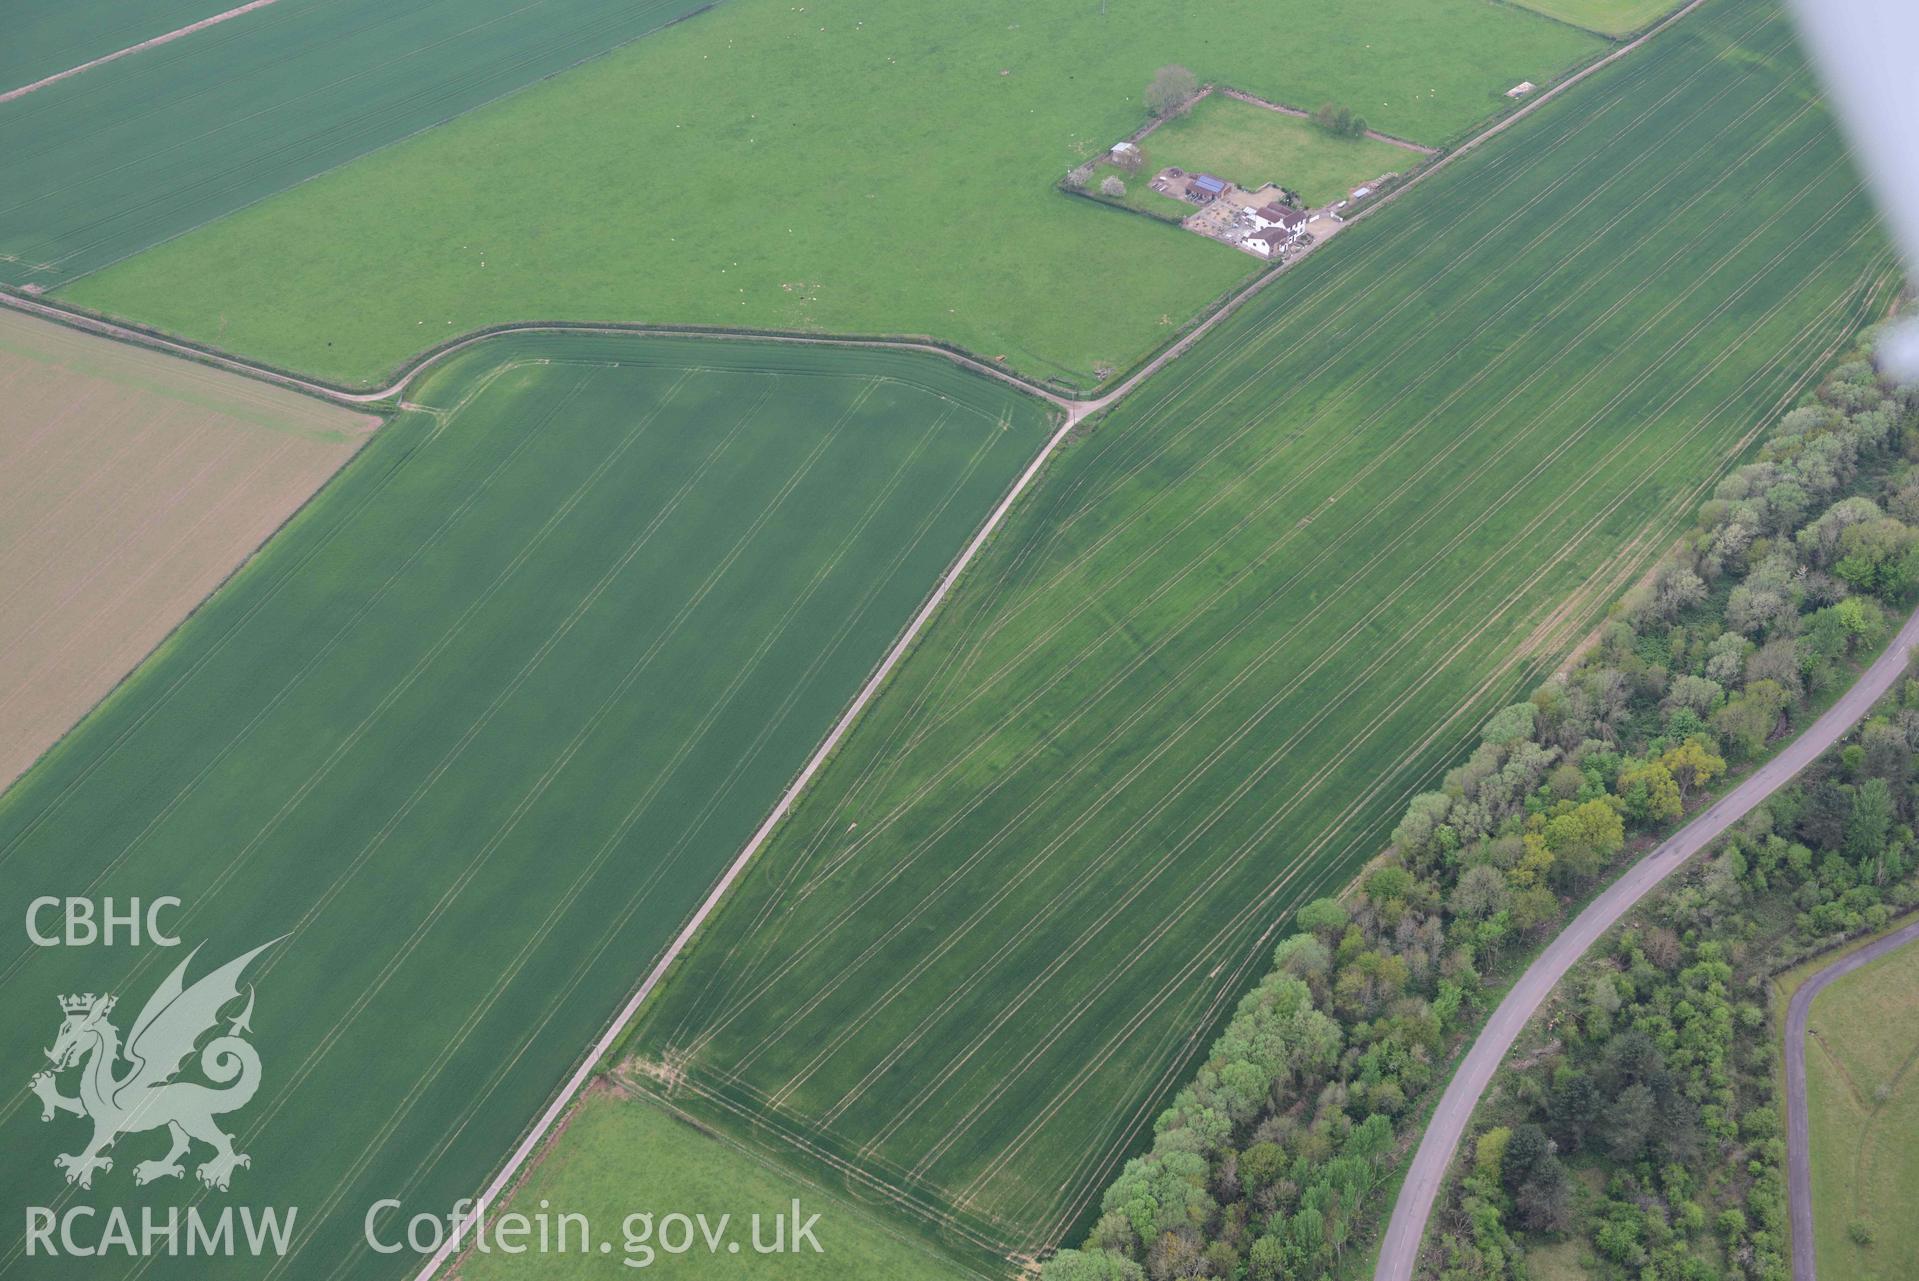 Trewent enclosed settlement, cropmarks emerging. Oblique aerial photograph taken during the Royal Commission's programme of archaeological aerial reconnaissance by Toby Driver on 29 April 2022.